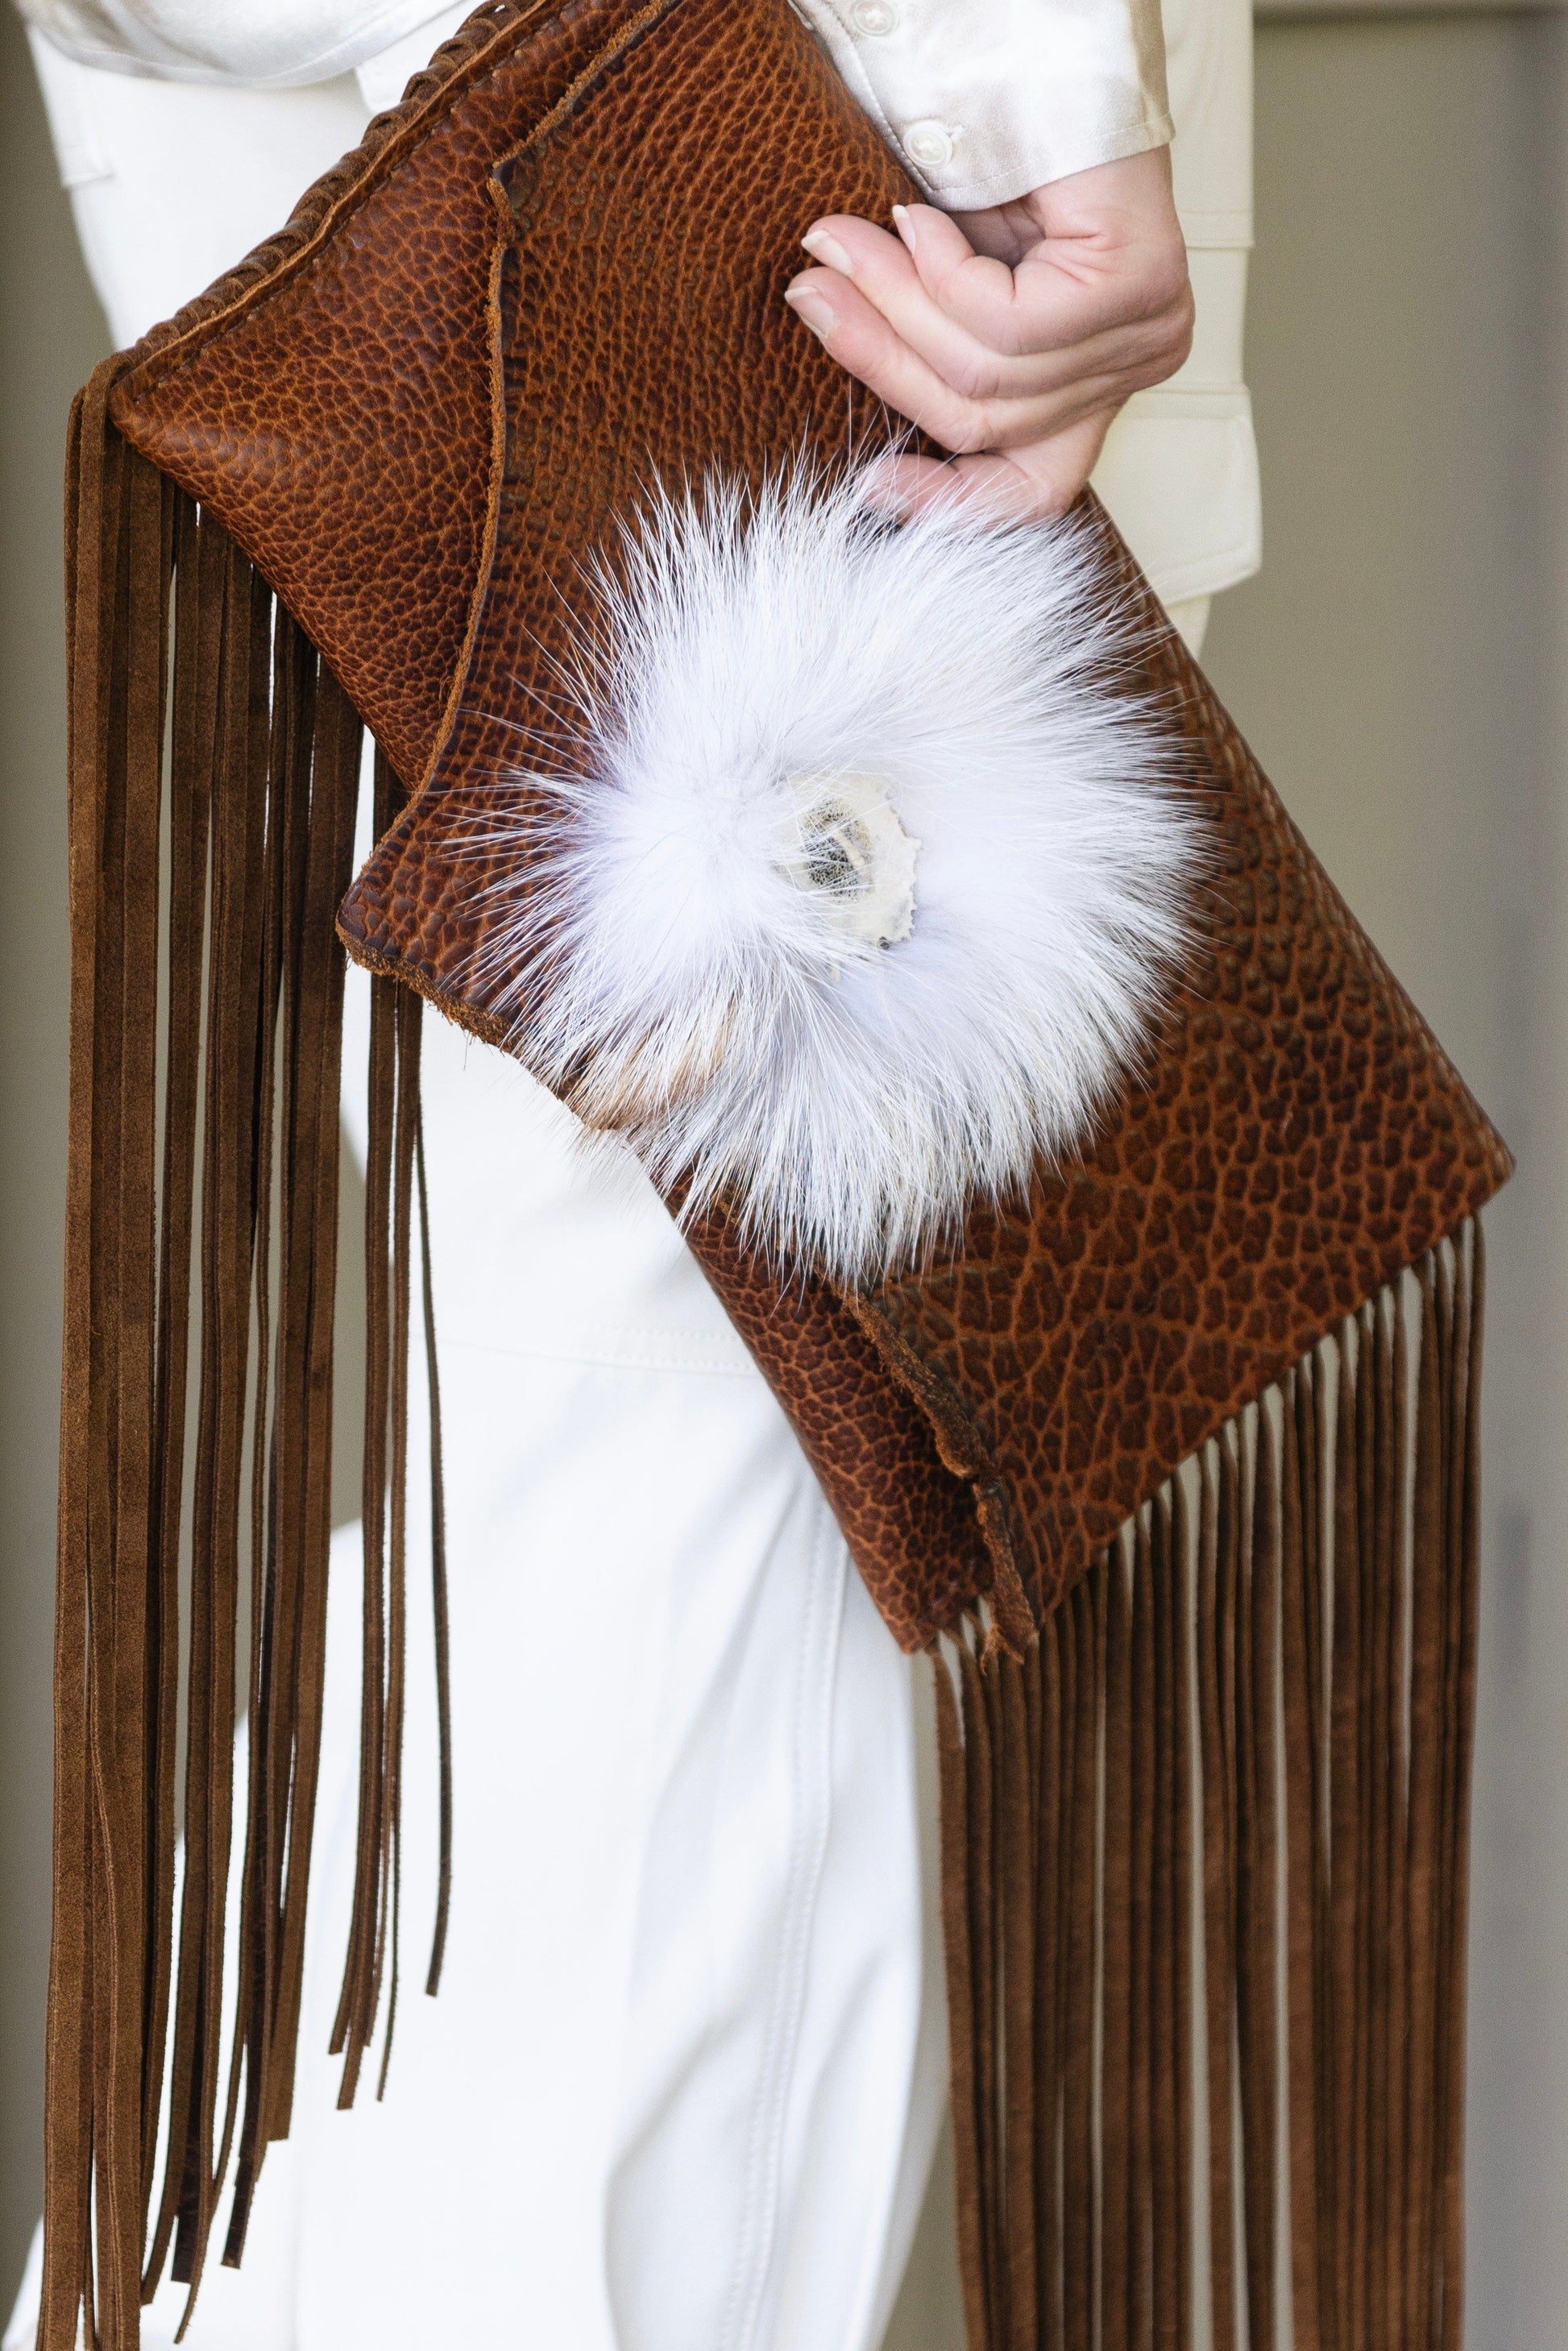 Bridger Leather Clutch The Bangtail Clutch - CURRENTLY Made to Order